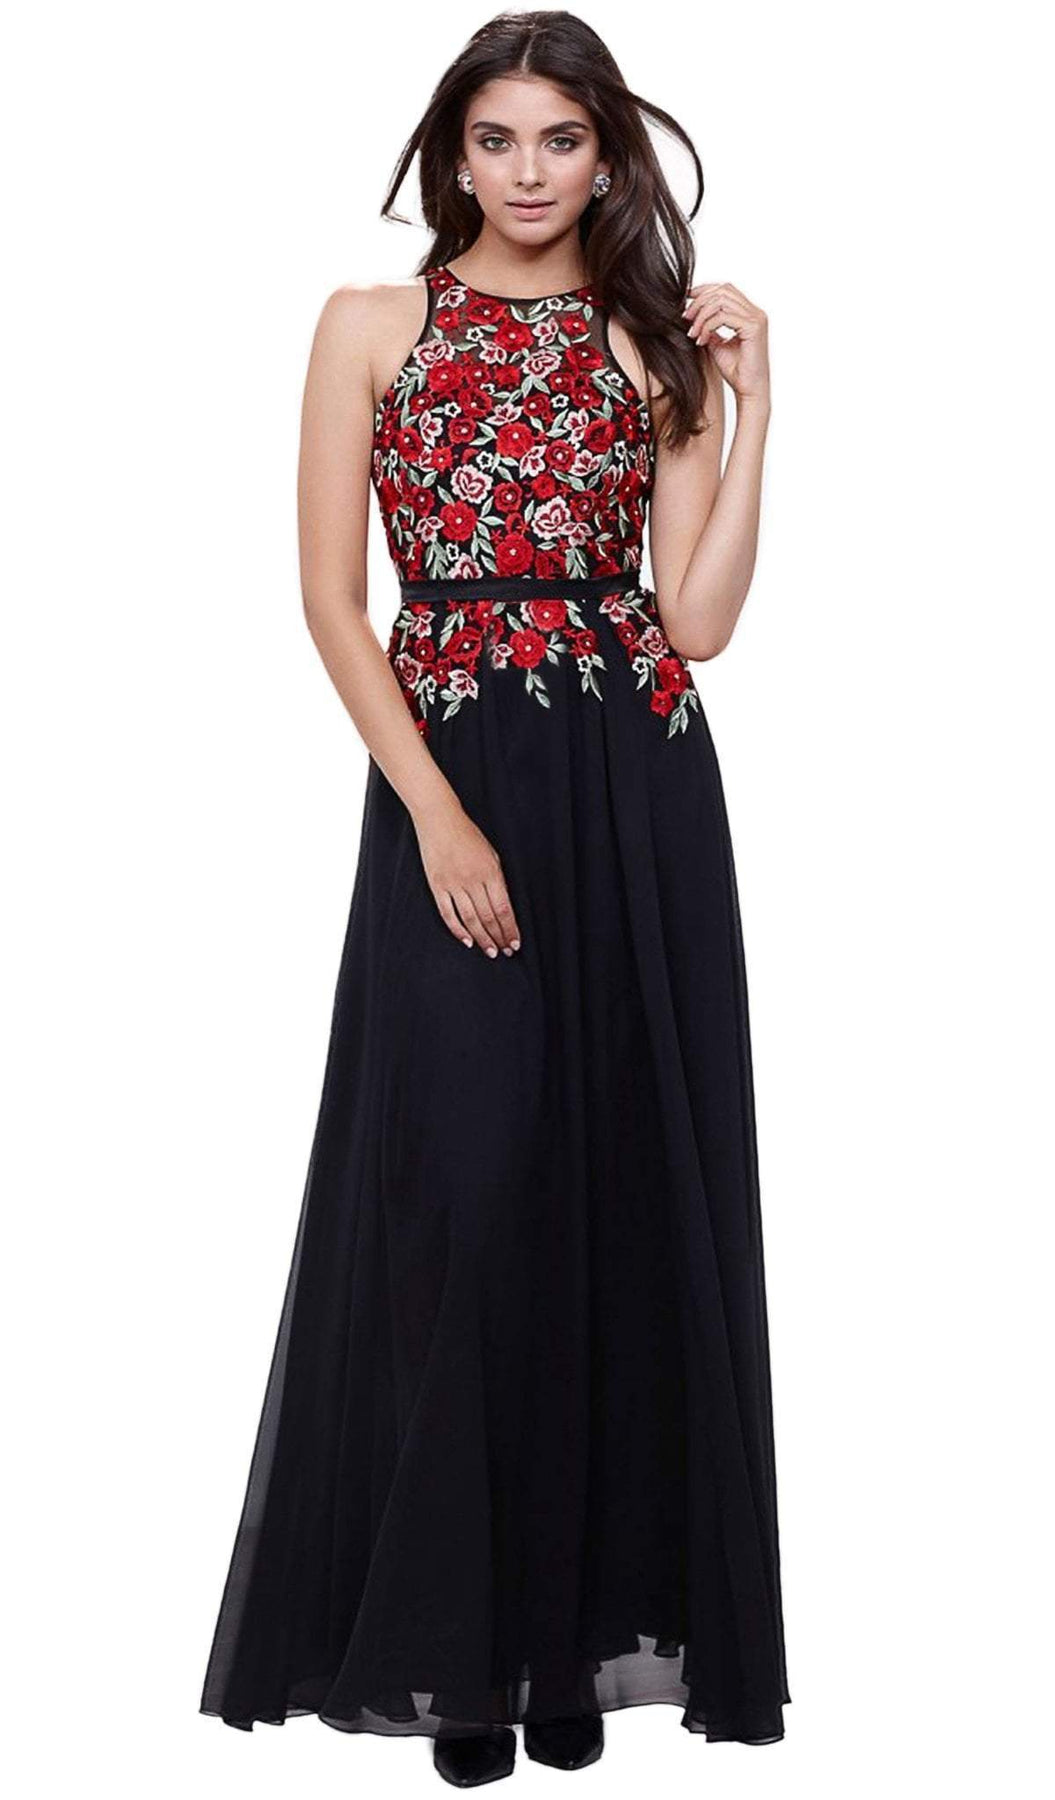 Nox Anabel - Floral Embroidered Long A-line Dress 8275SC – ADASA